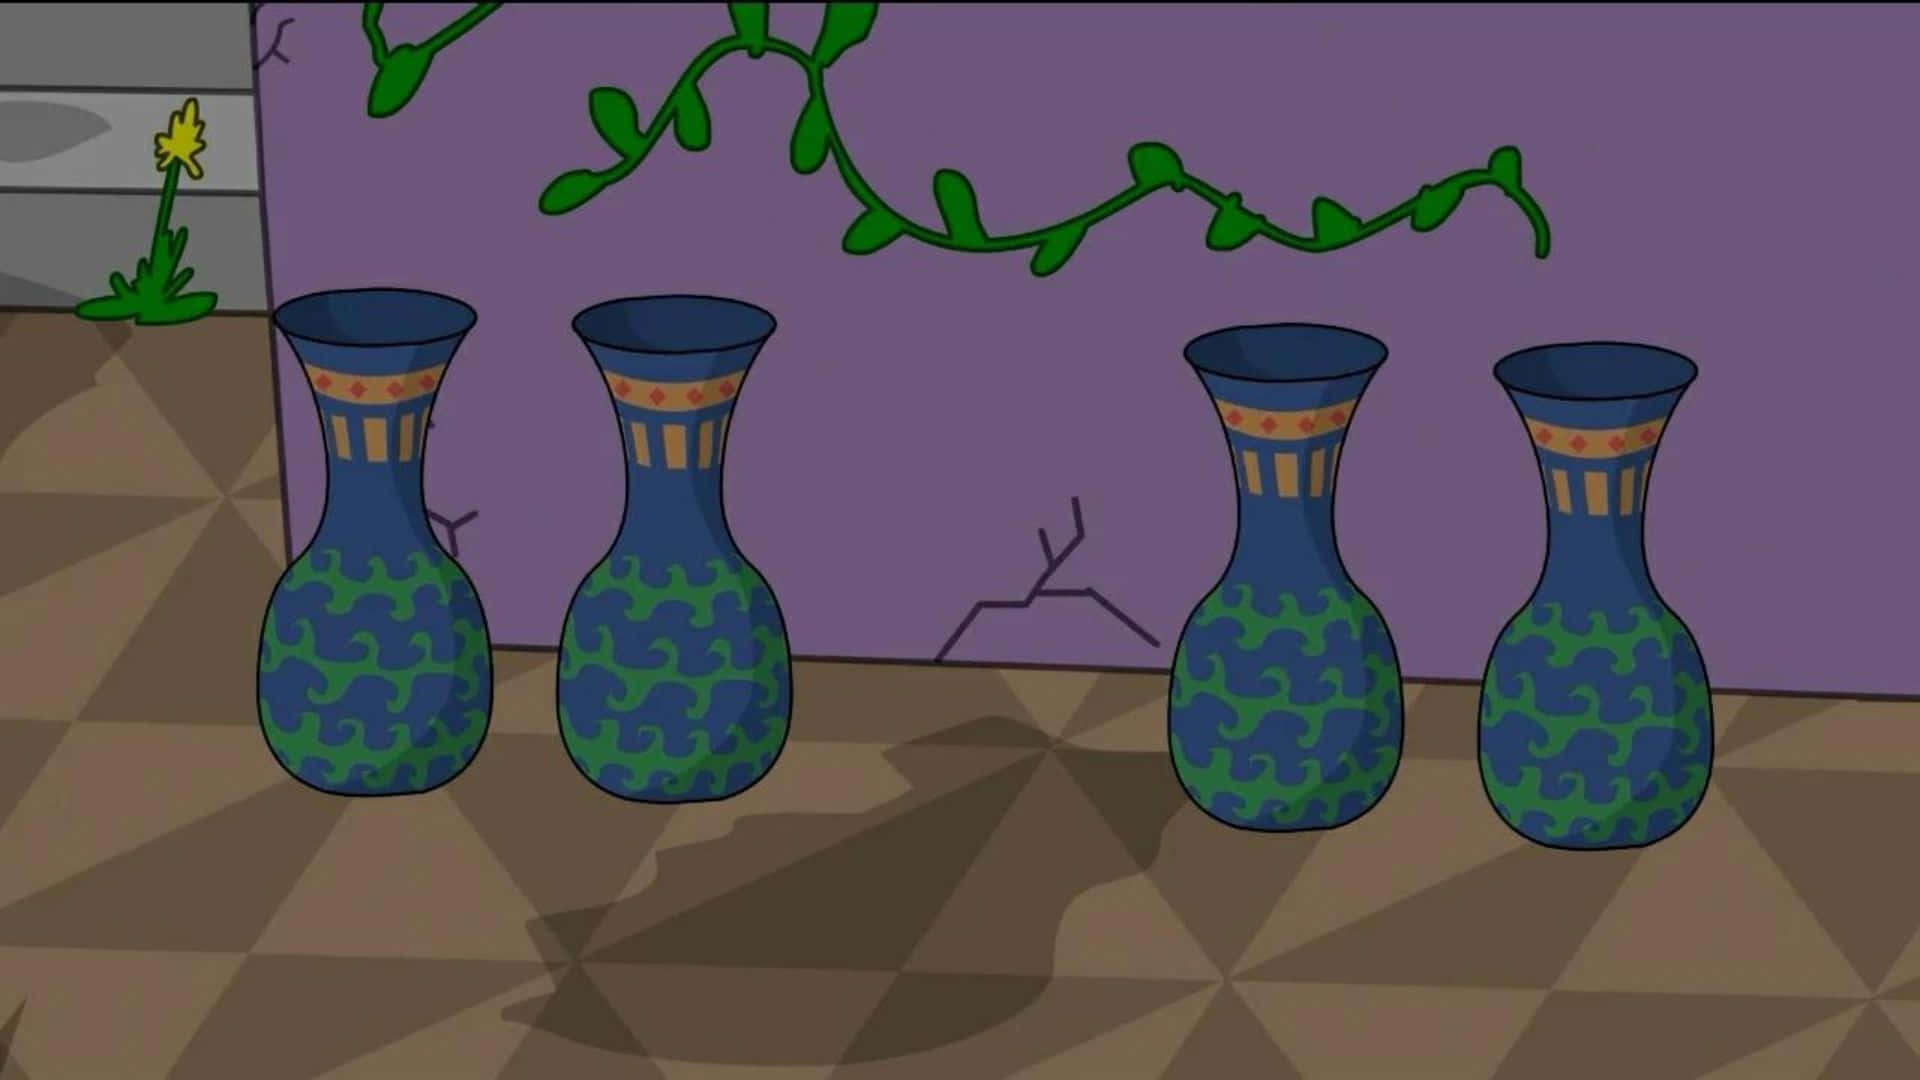 A Cartoon Image Of Vases In A Room